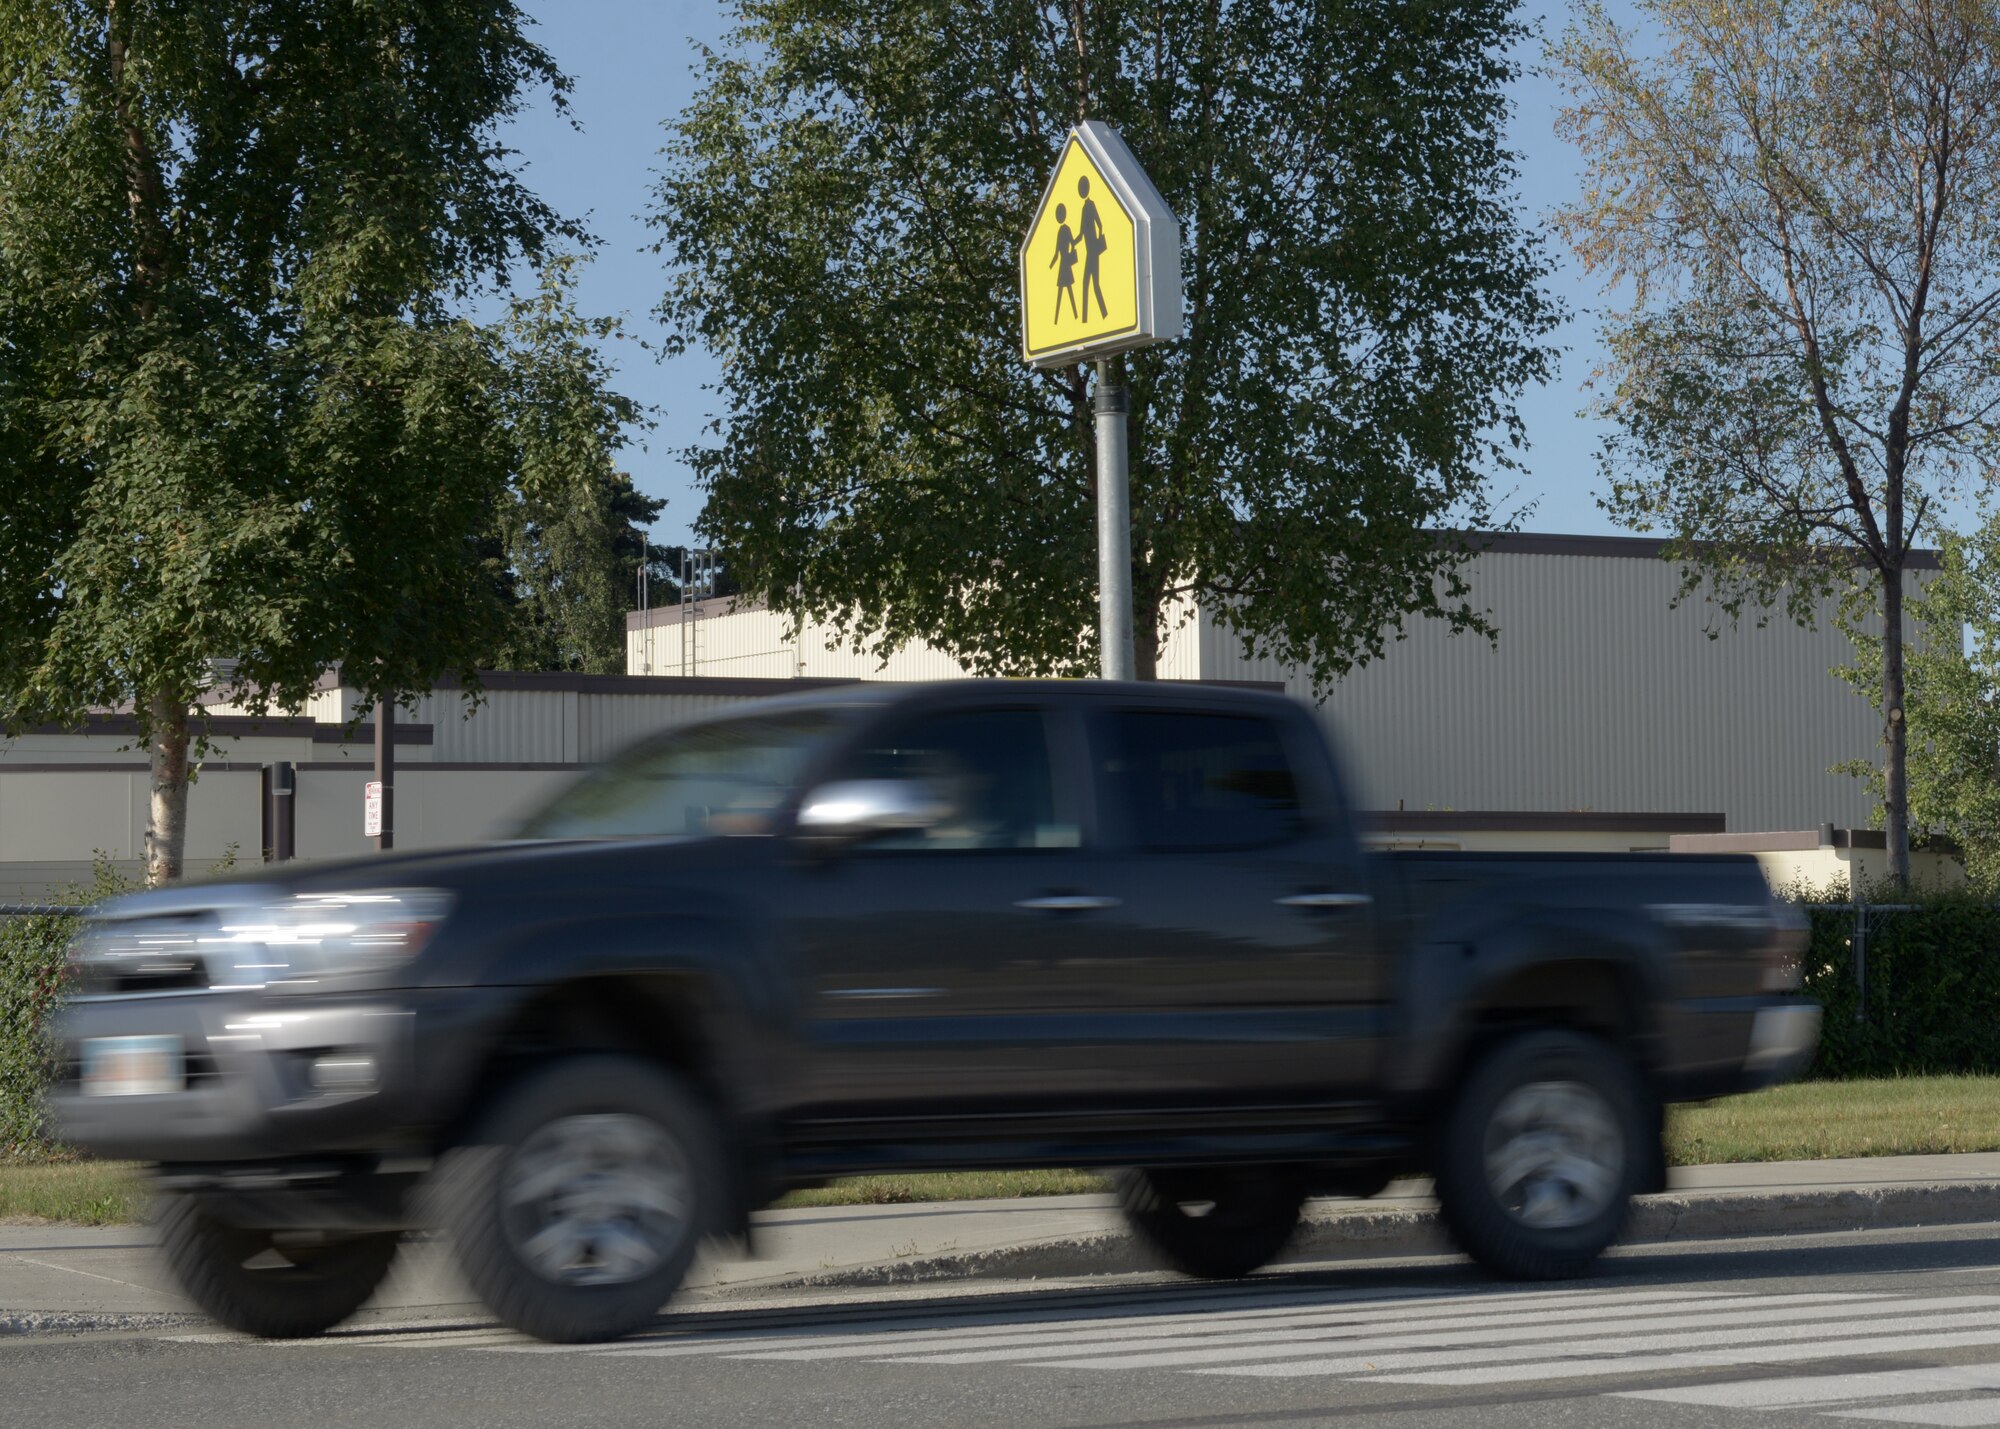 With the school year approaching, Joint Base Elmendorf-Richardson, Alaska, personnel should be mindful of pedestrians and school zones. Drivers must be vigilant and use situational awareness especially when children are traveling to school.